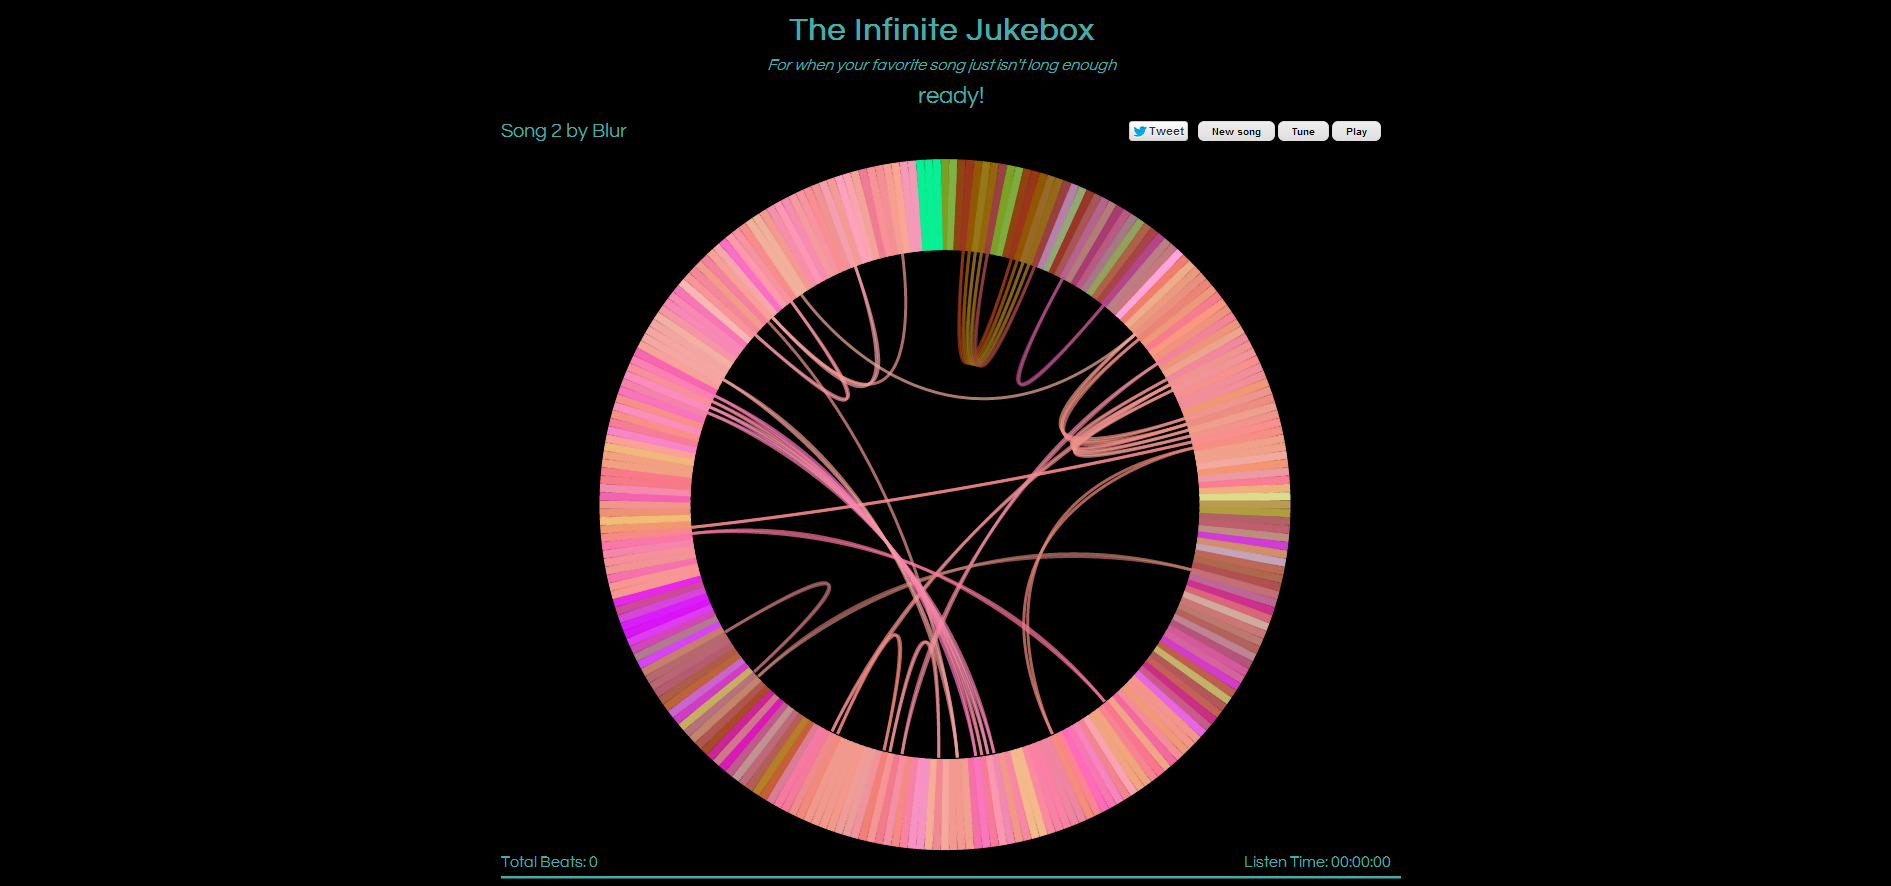 Noodle Live App of the Month - Infinite Jukebox